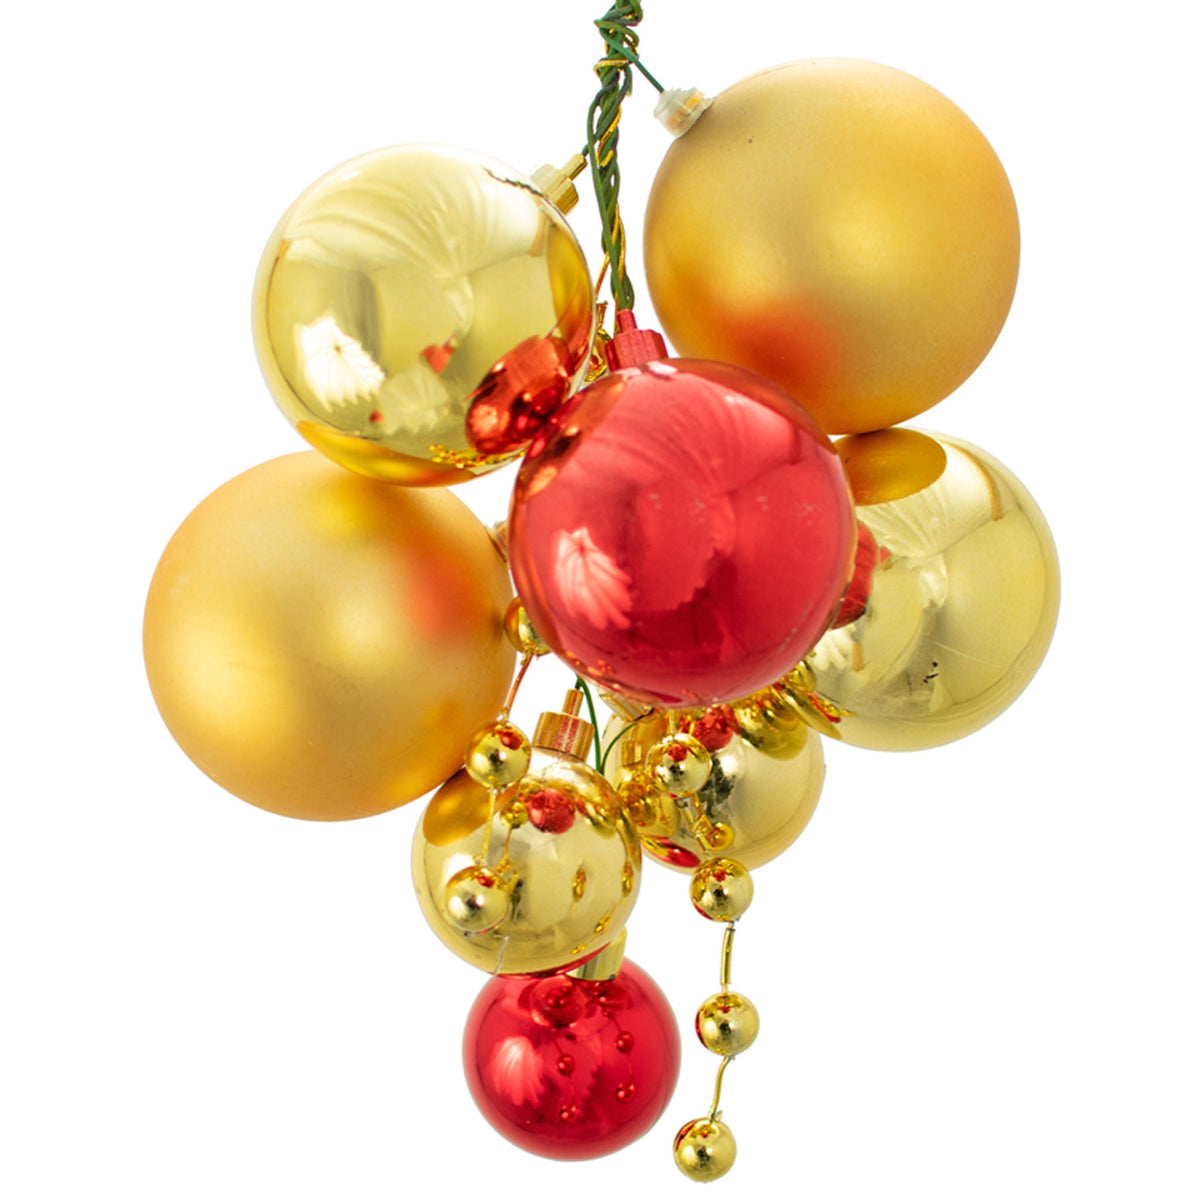 The Santa Cruz Ball Cluster with Gold Berries